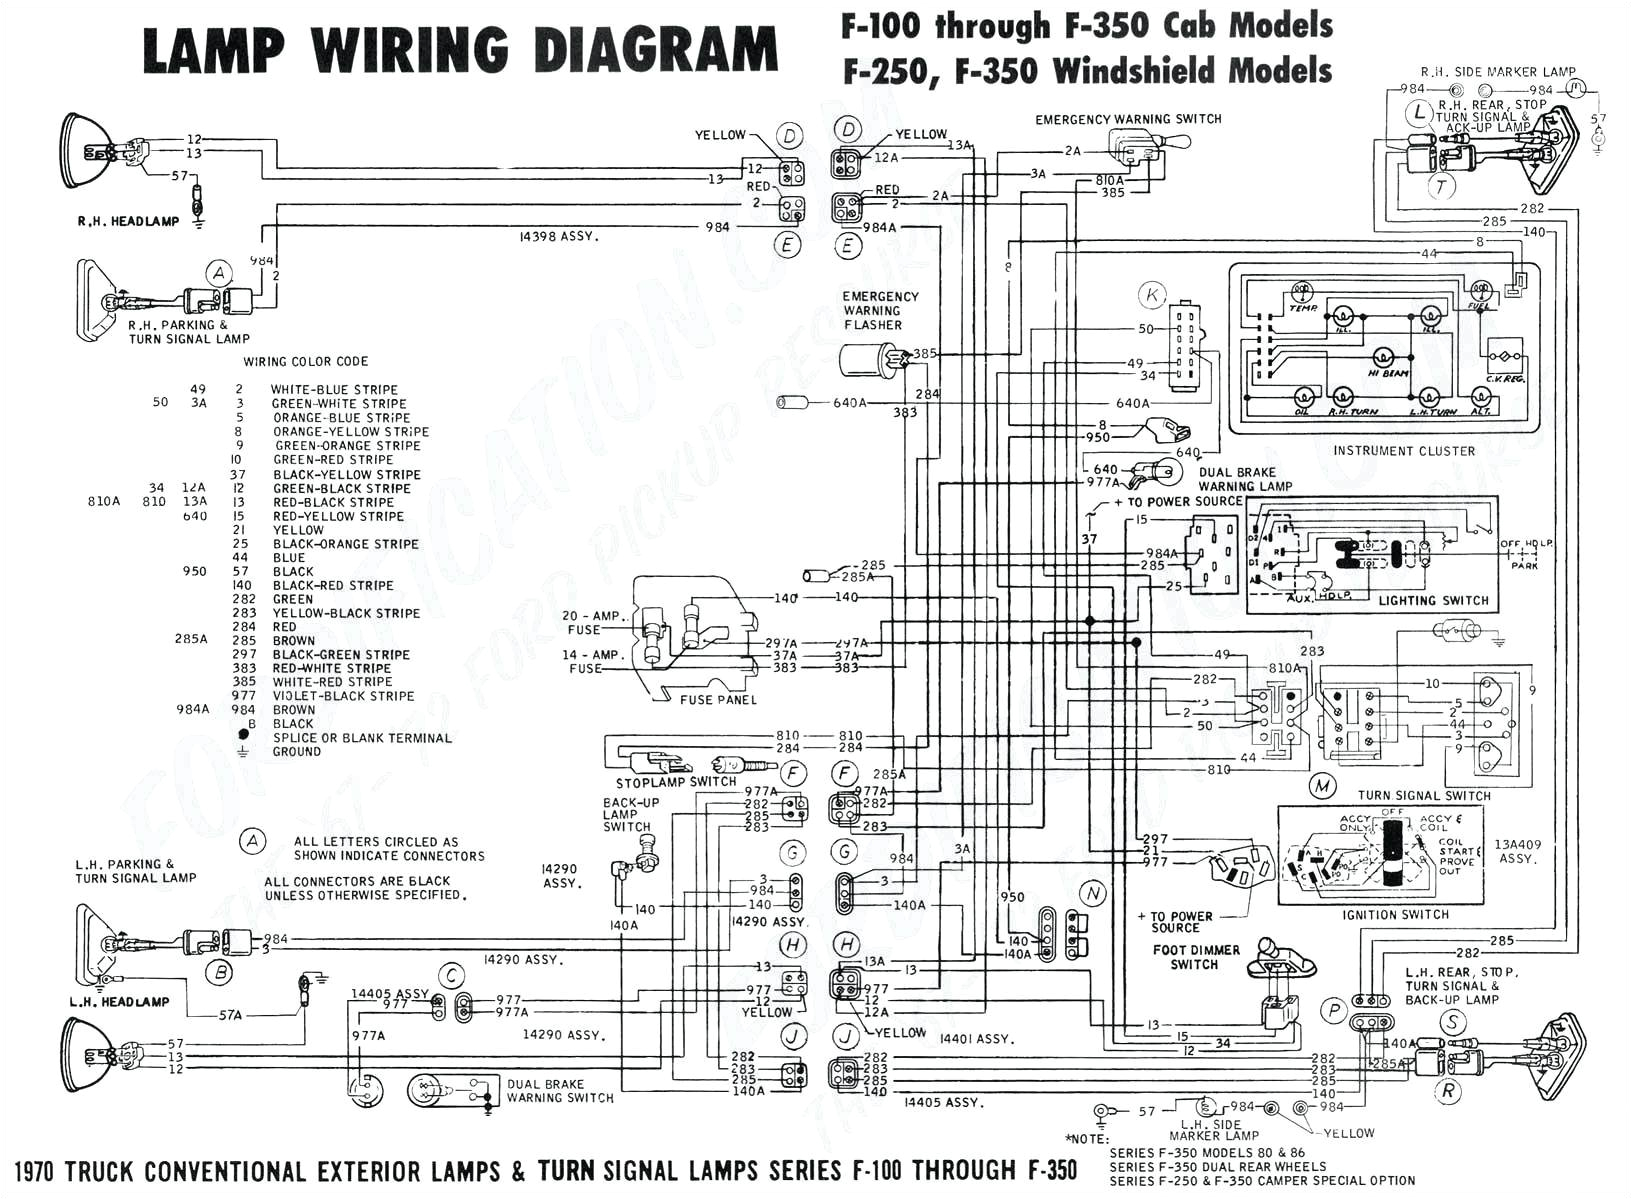 3 Wire Tail Light Wiring Diagram 3 Wire Flasher Wiring Diagram Wiring Diagram toolbox